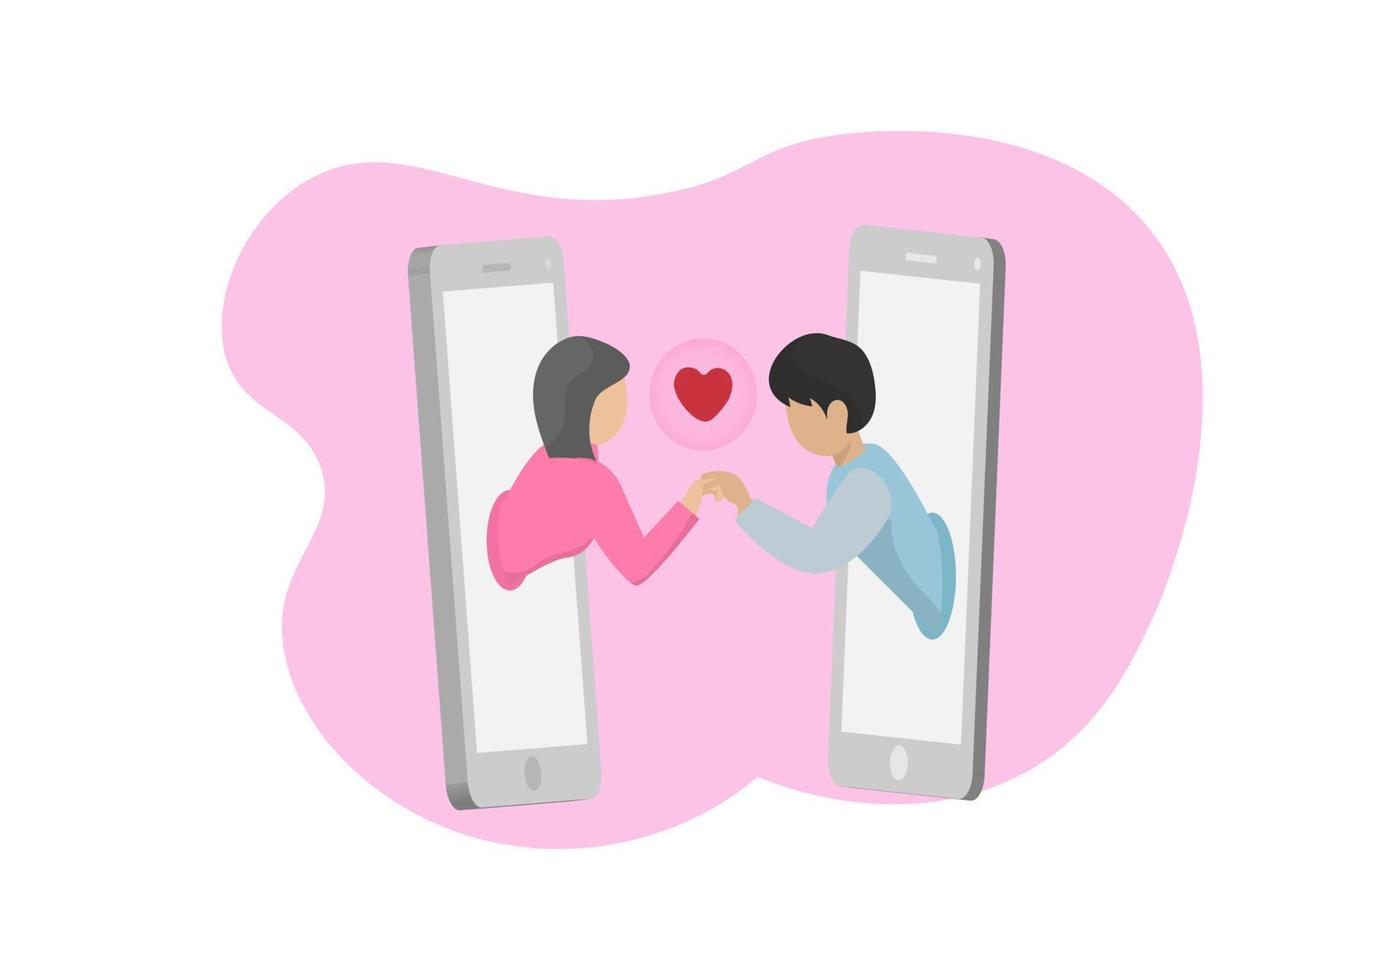 Modern young people use smartphone applications as communication tools. The concept of virtual relationships about containment and self-isolation. Vector illustration